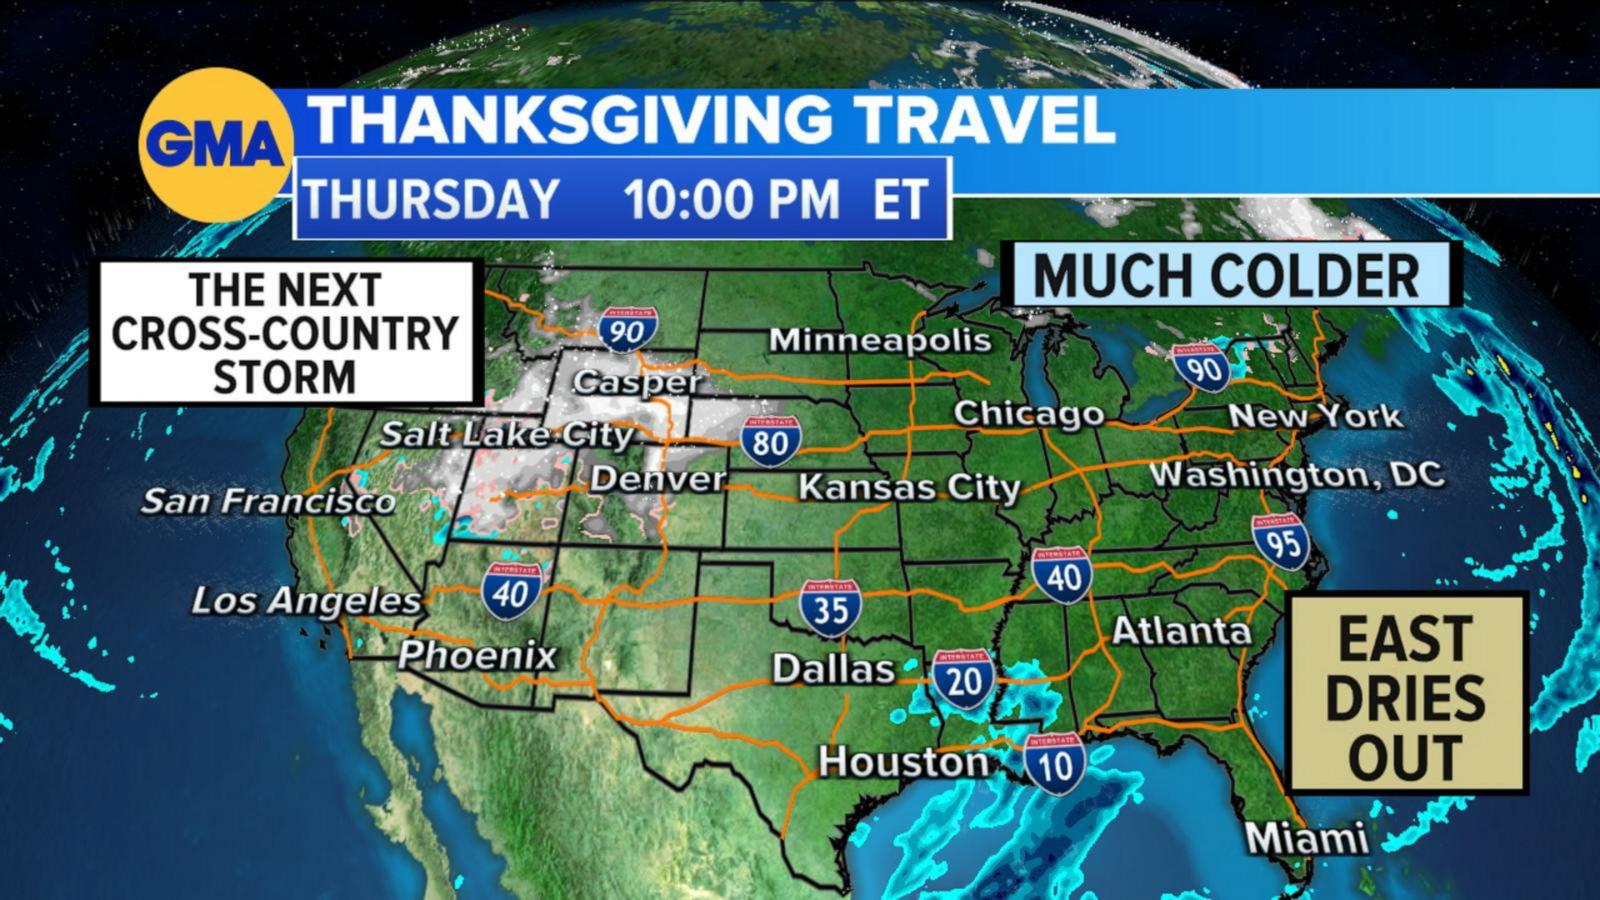 VIDEO: Holiday storm on the move ahead of Thanksgiving